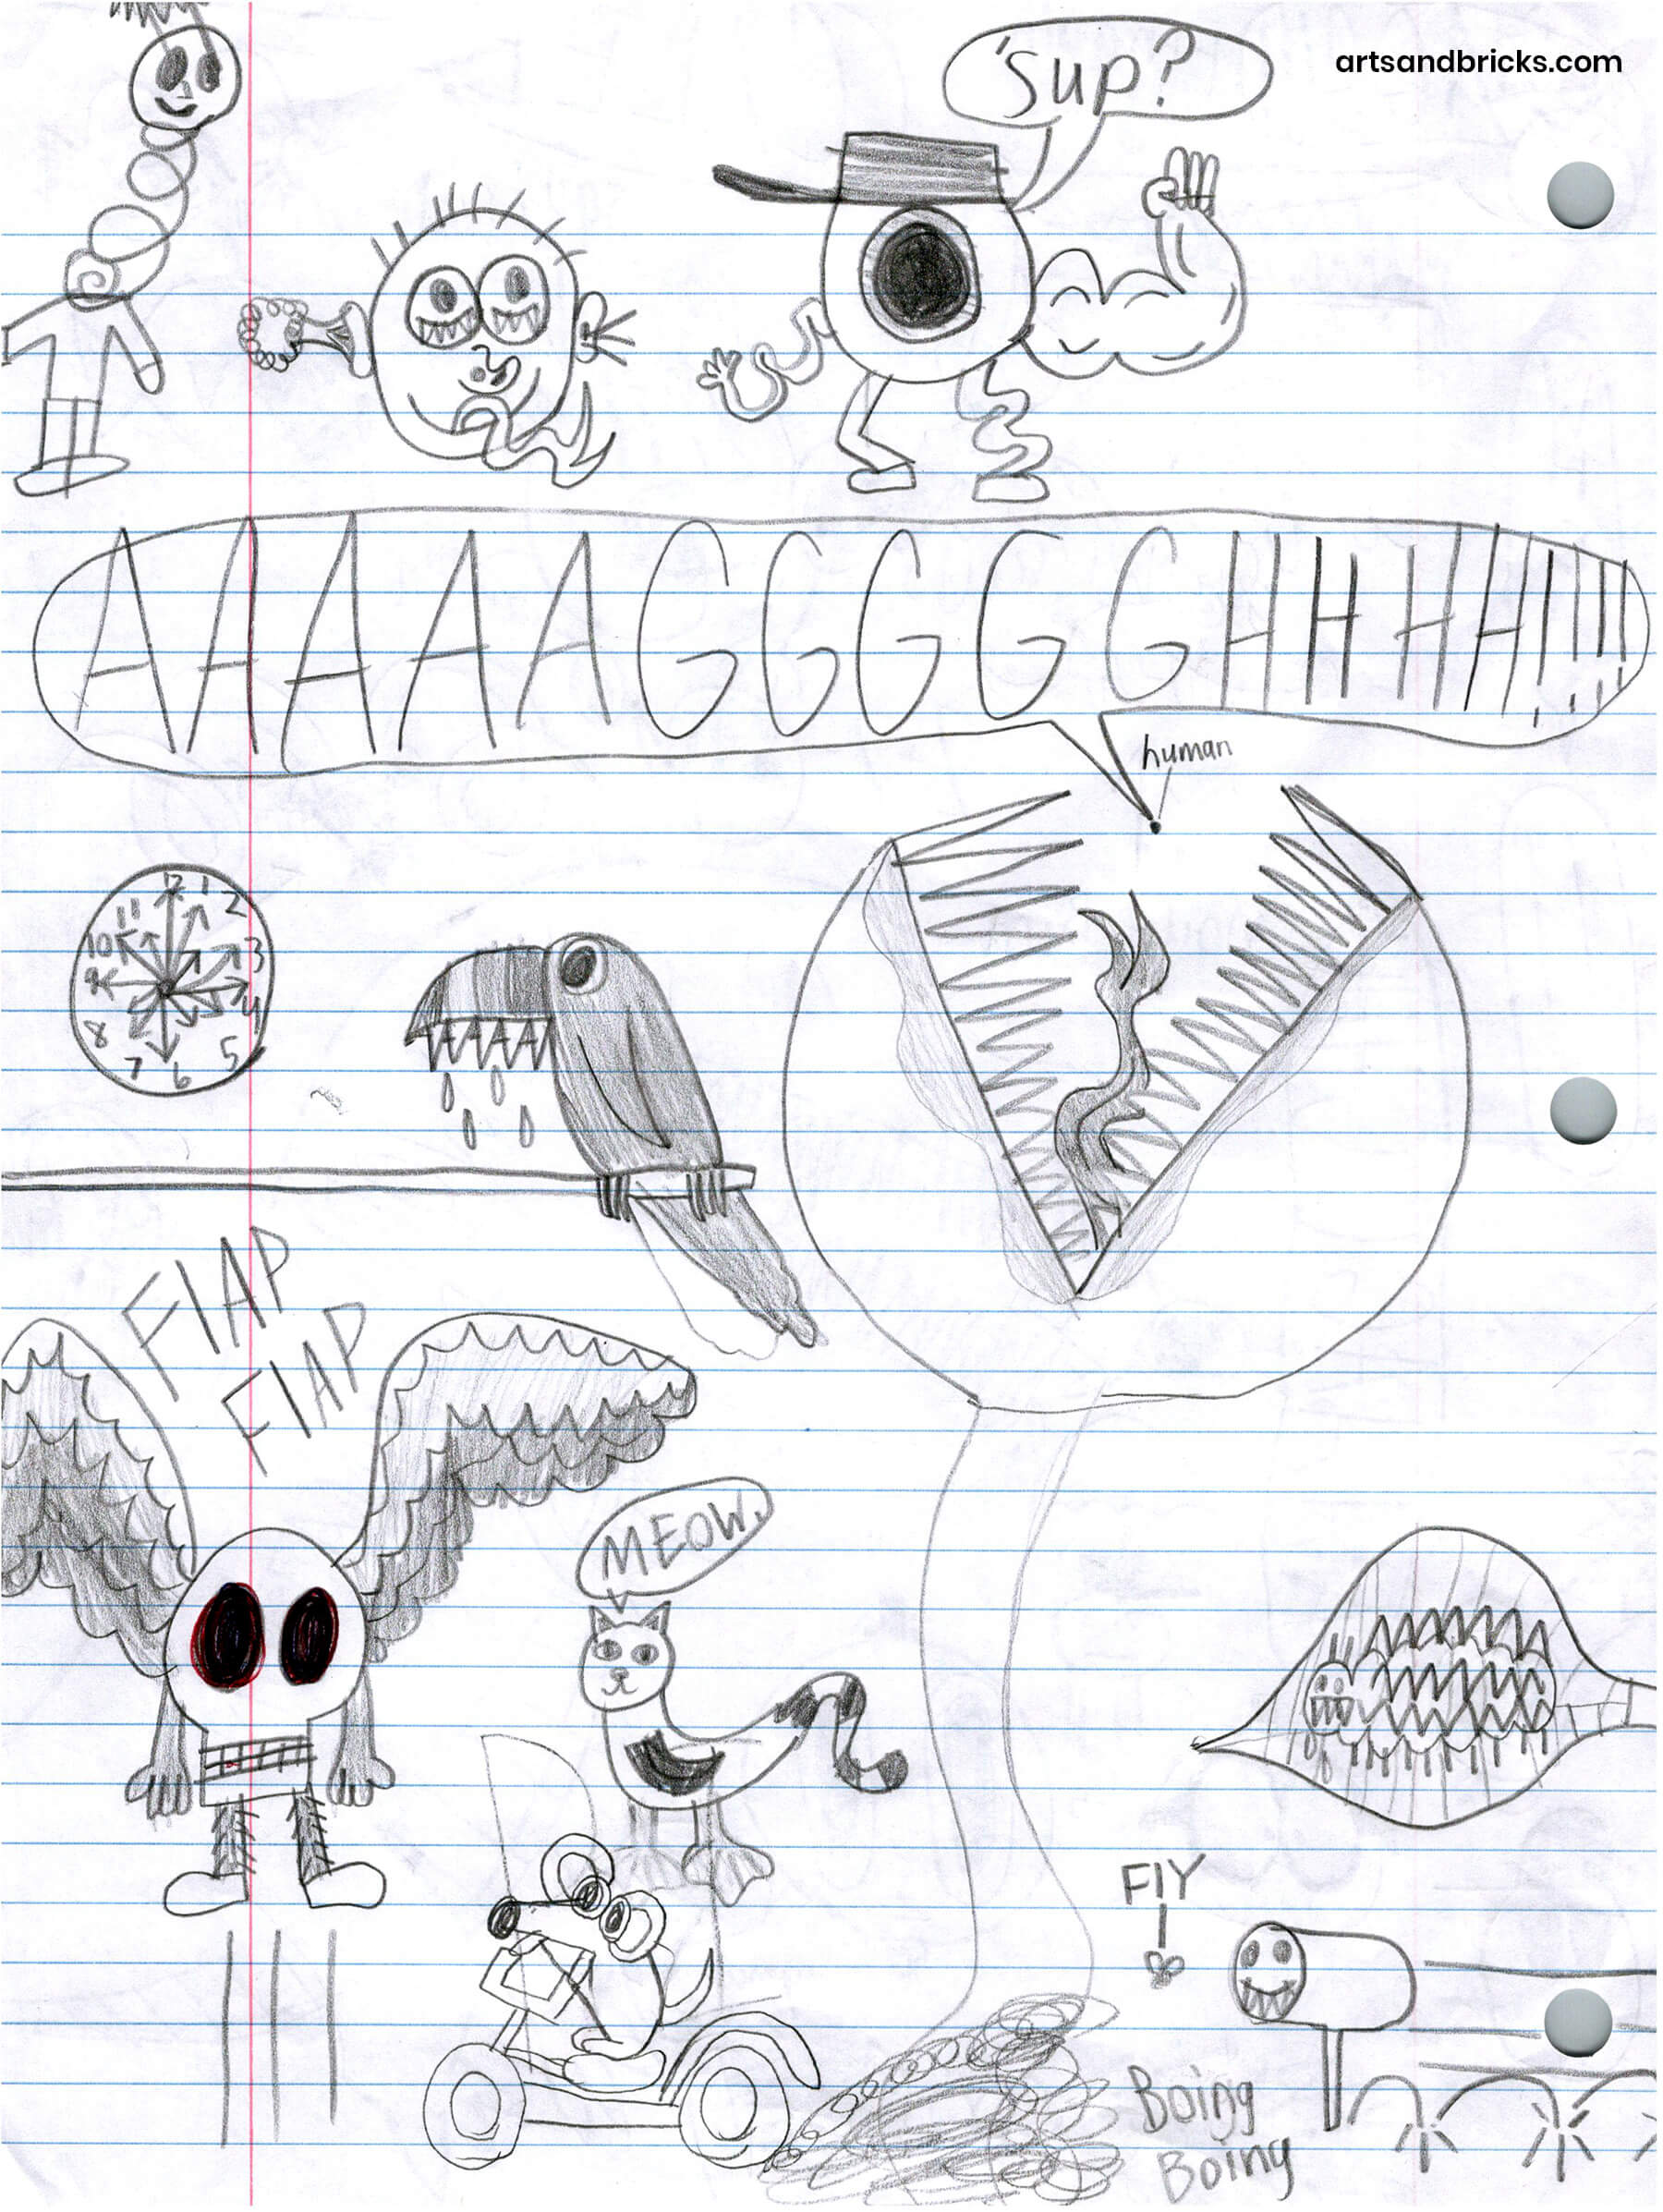 I especially enjoy how doodling allows kids to play with varying scales in their drawings. In the sheet below, there's a humongous venus fly trap about to devour a teeny, tiny human. Fourth grade boy humor at its best! Again, love the combo doodle of the "Duck Cat."